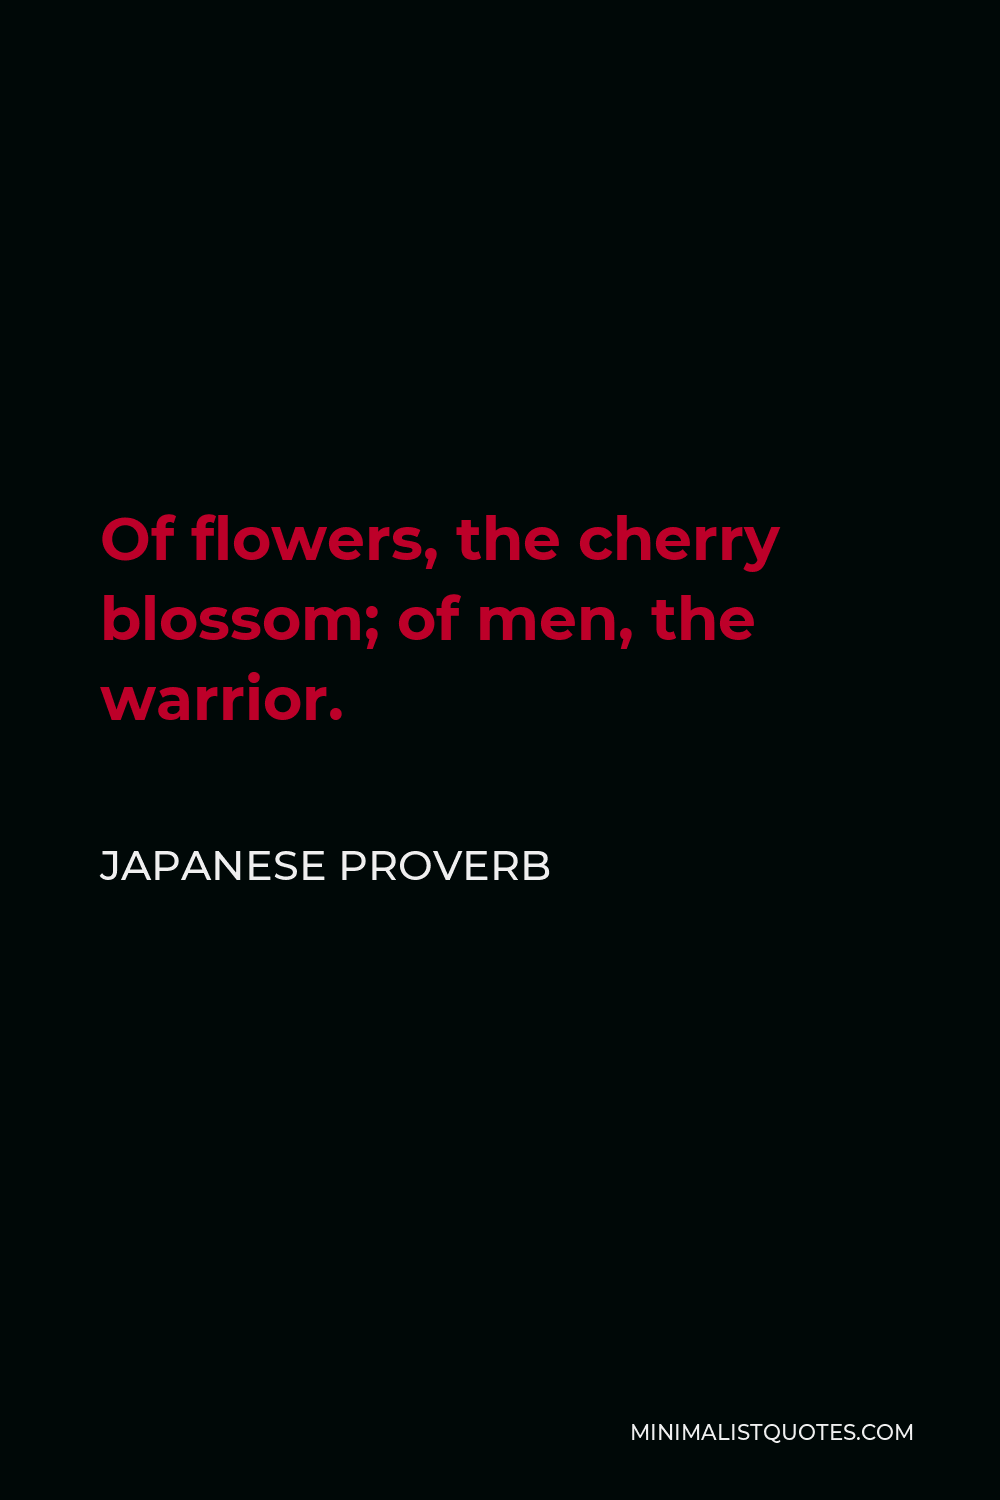 Japanese Proverb Quote - Of flowers, the cherry blossom; of men, the warrior.